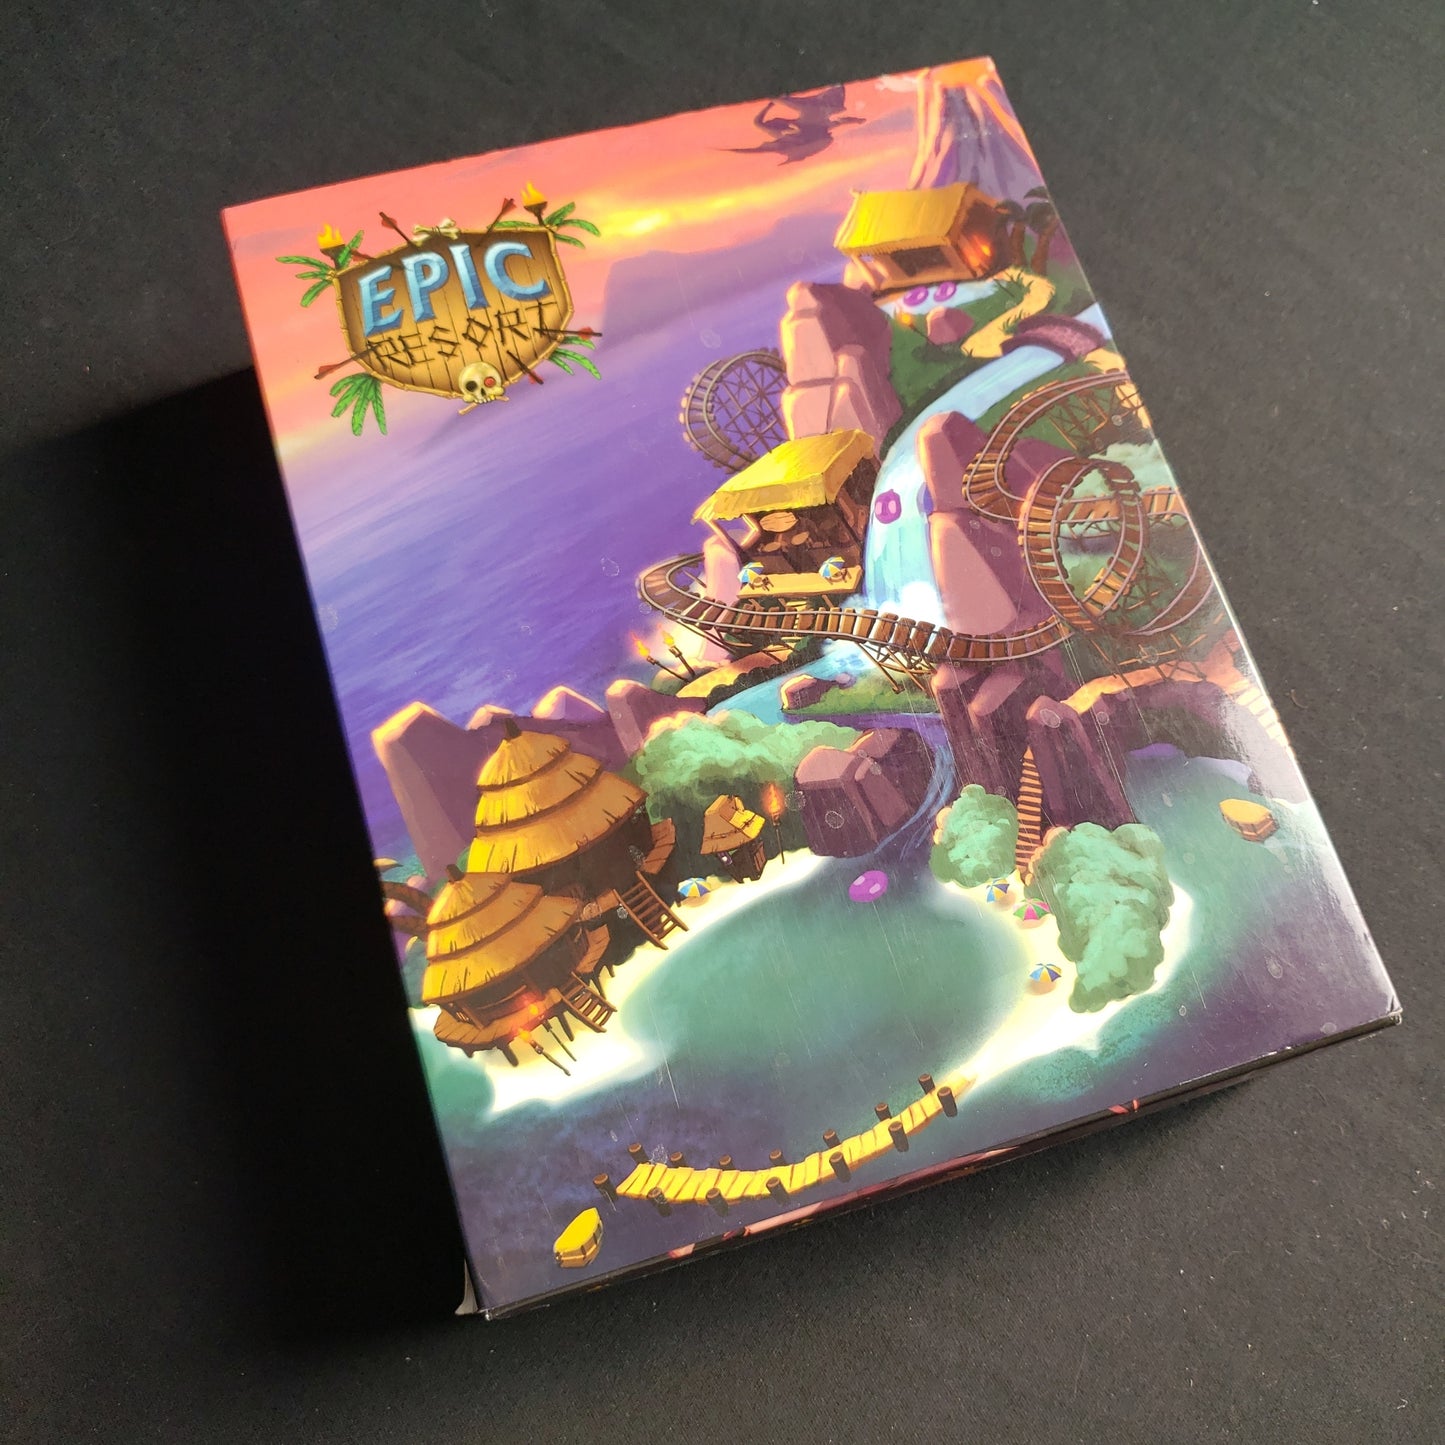 Image shows the front cover of the box of the Epic Resort board game